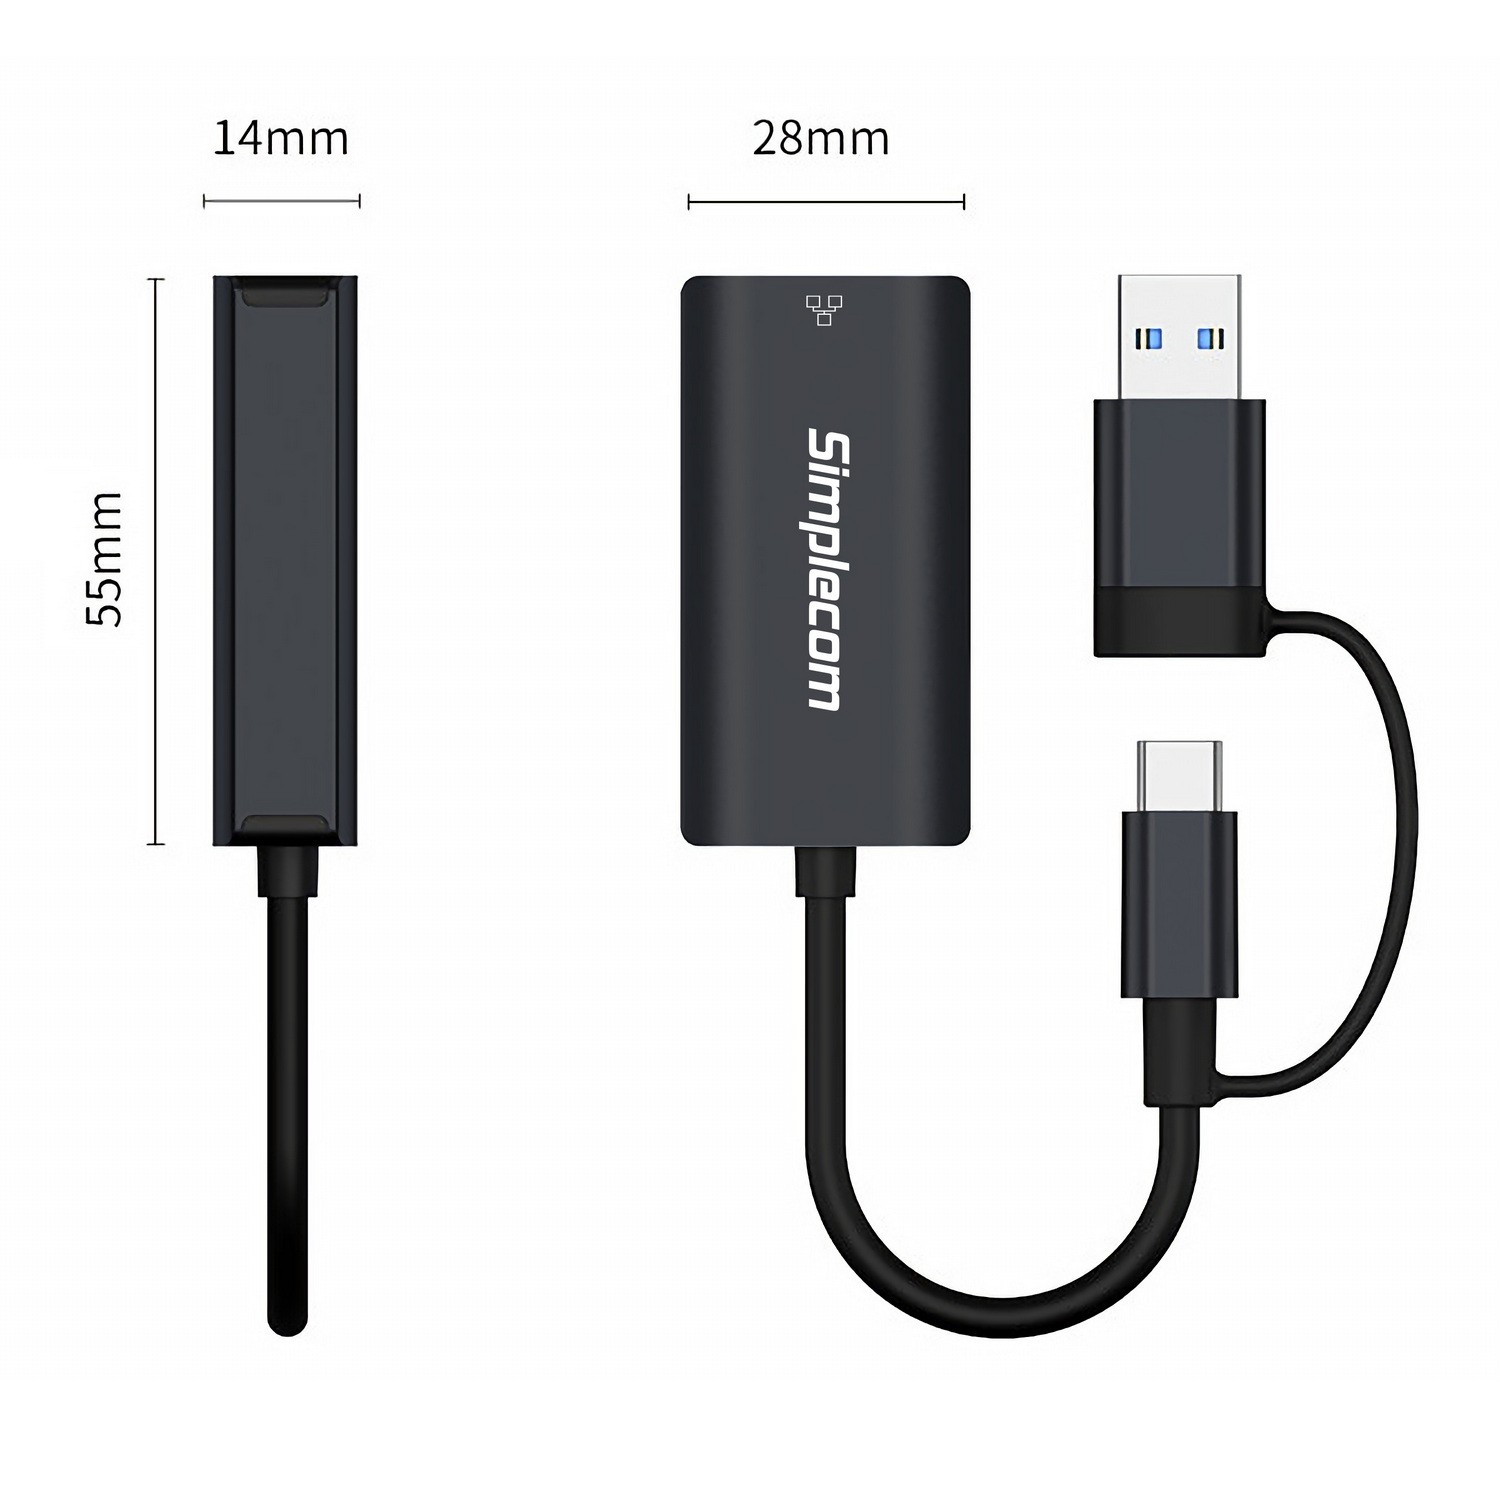 Simplecom NU315 USB-C and USB-A to Gigabit Ethernet Adapter